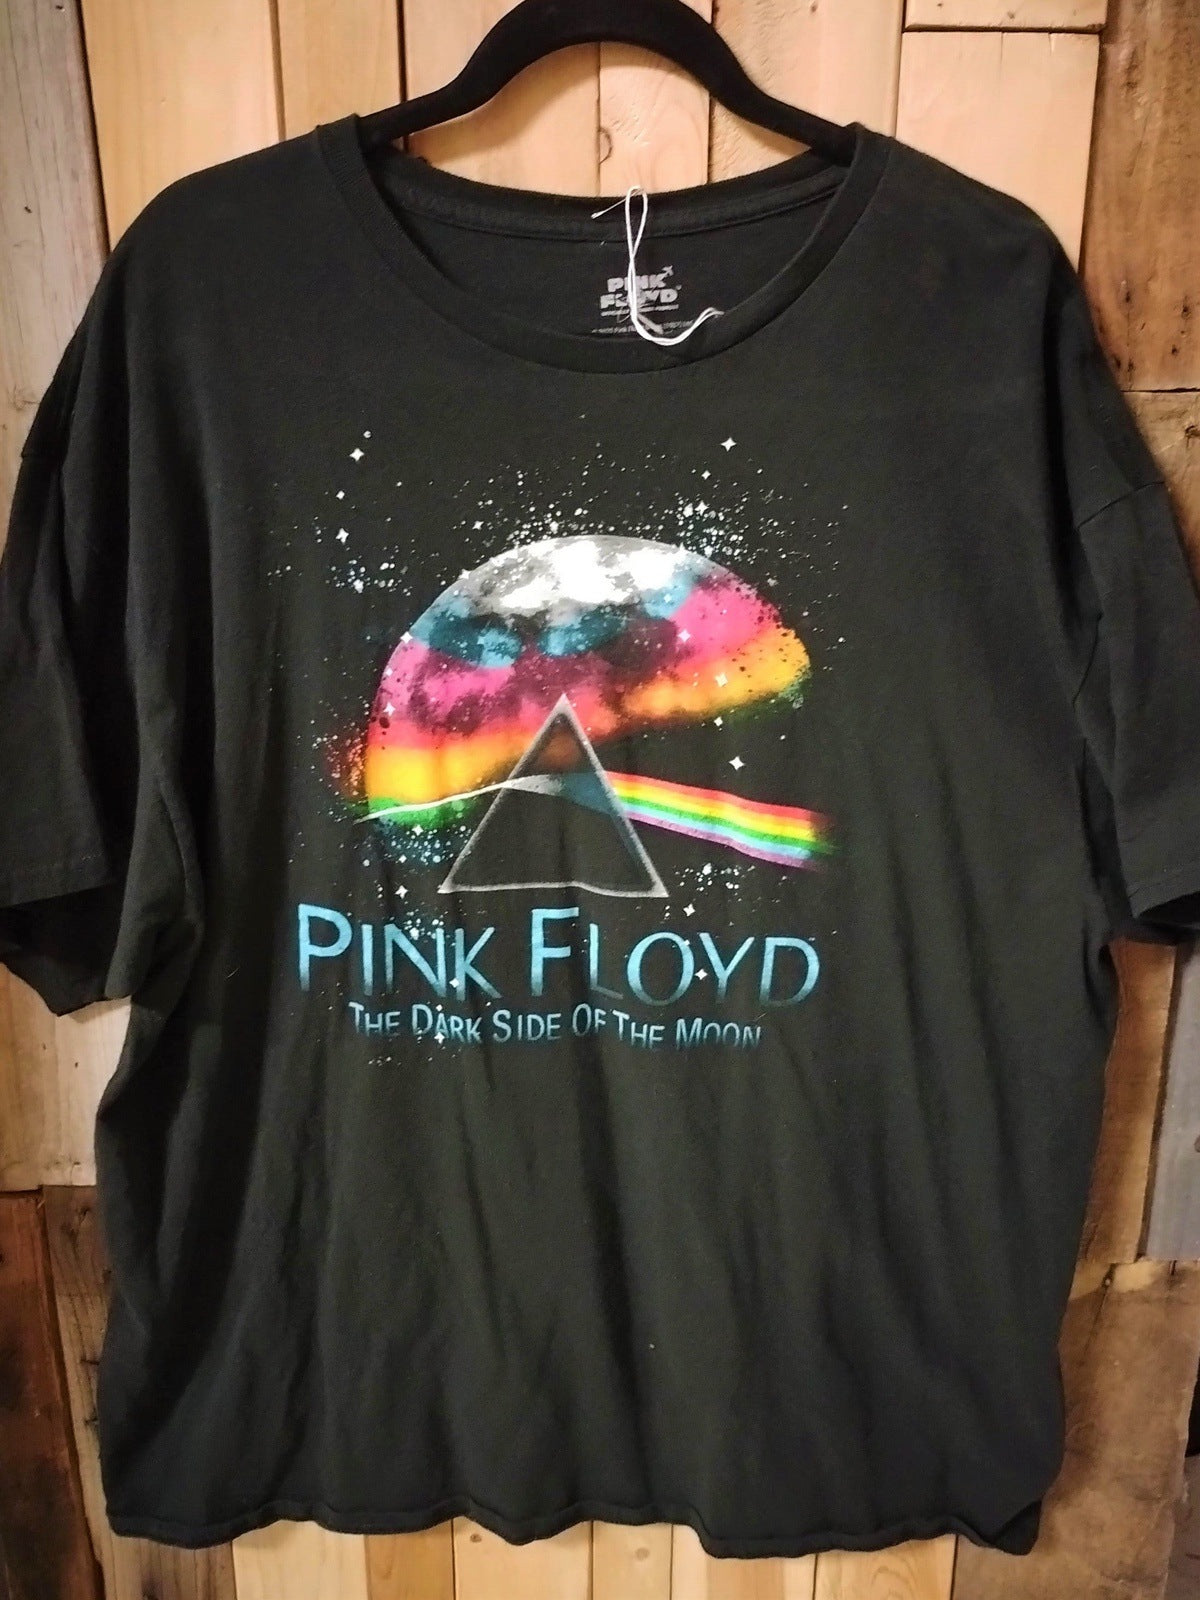 Pink Floyd Official Merchandise "Dark Side of the Moon" T Shirt Size 2XL